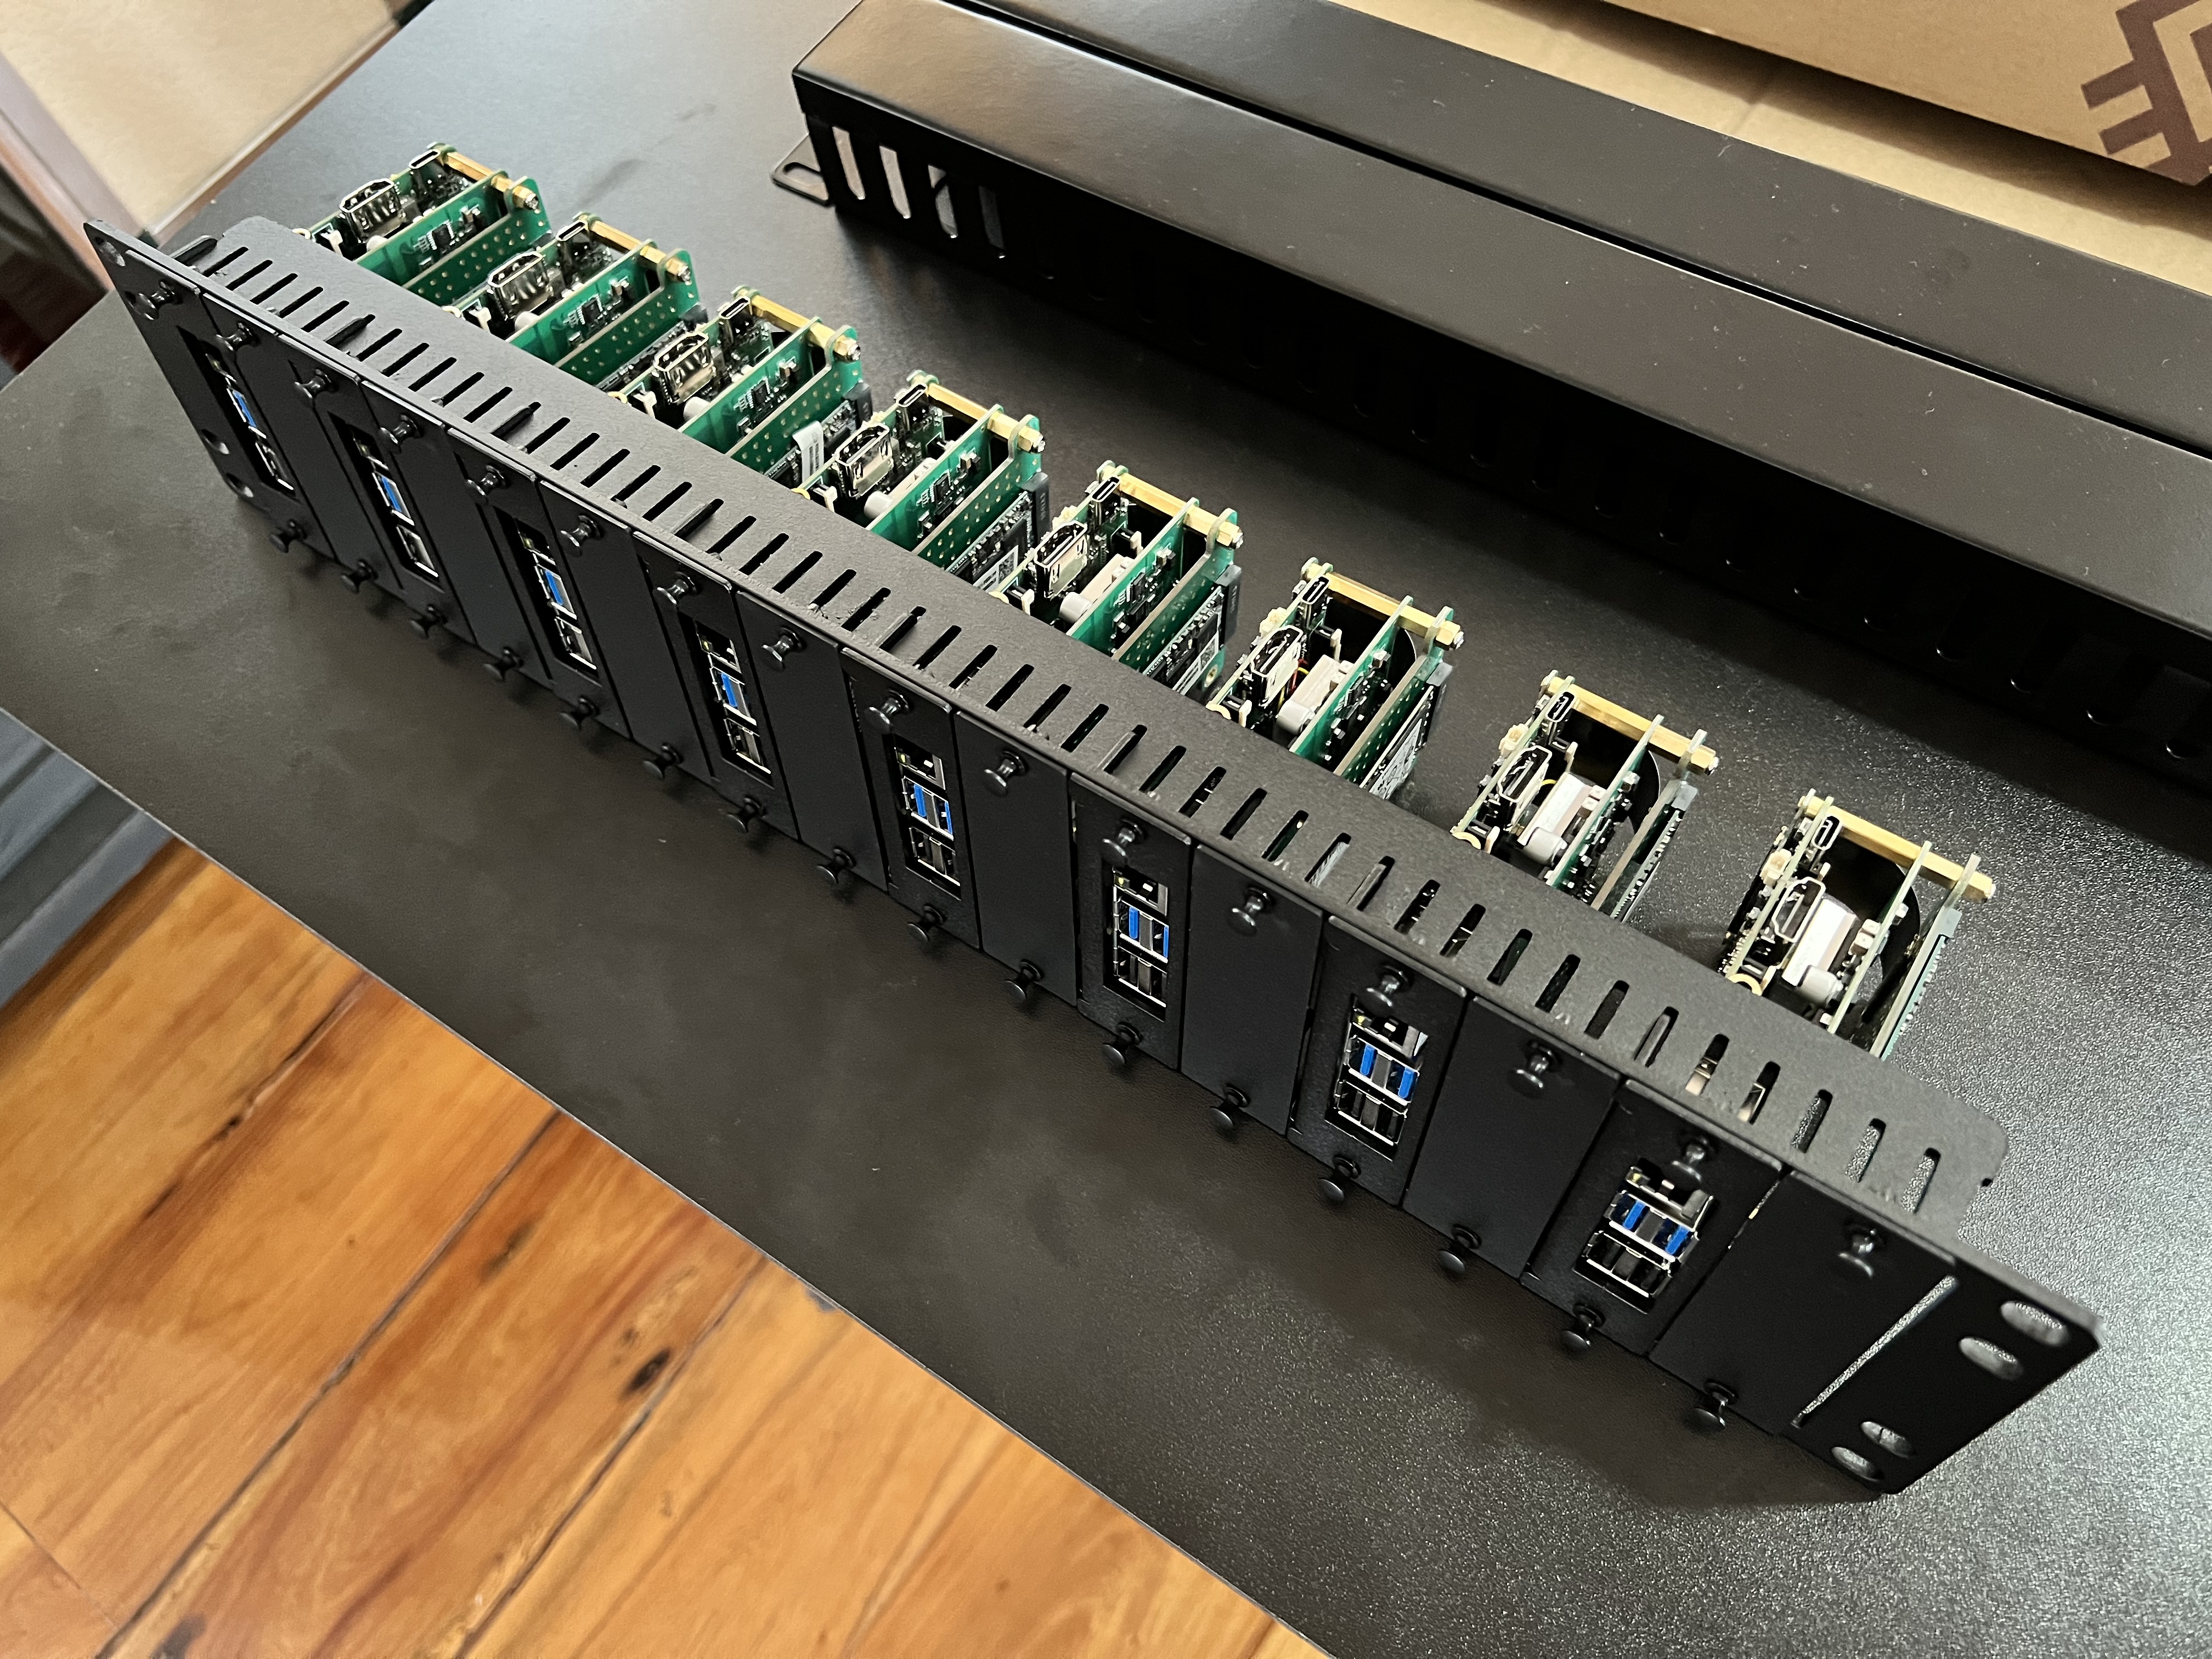 Building an 8-node Pi cluster (during a chip shortage), part one